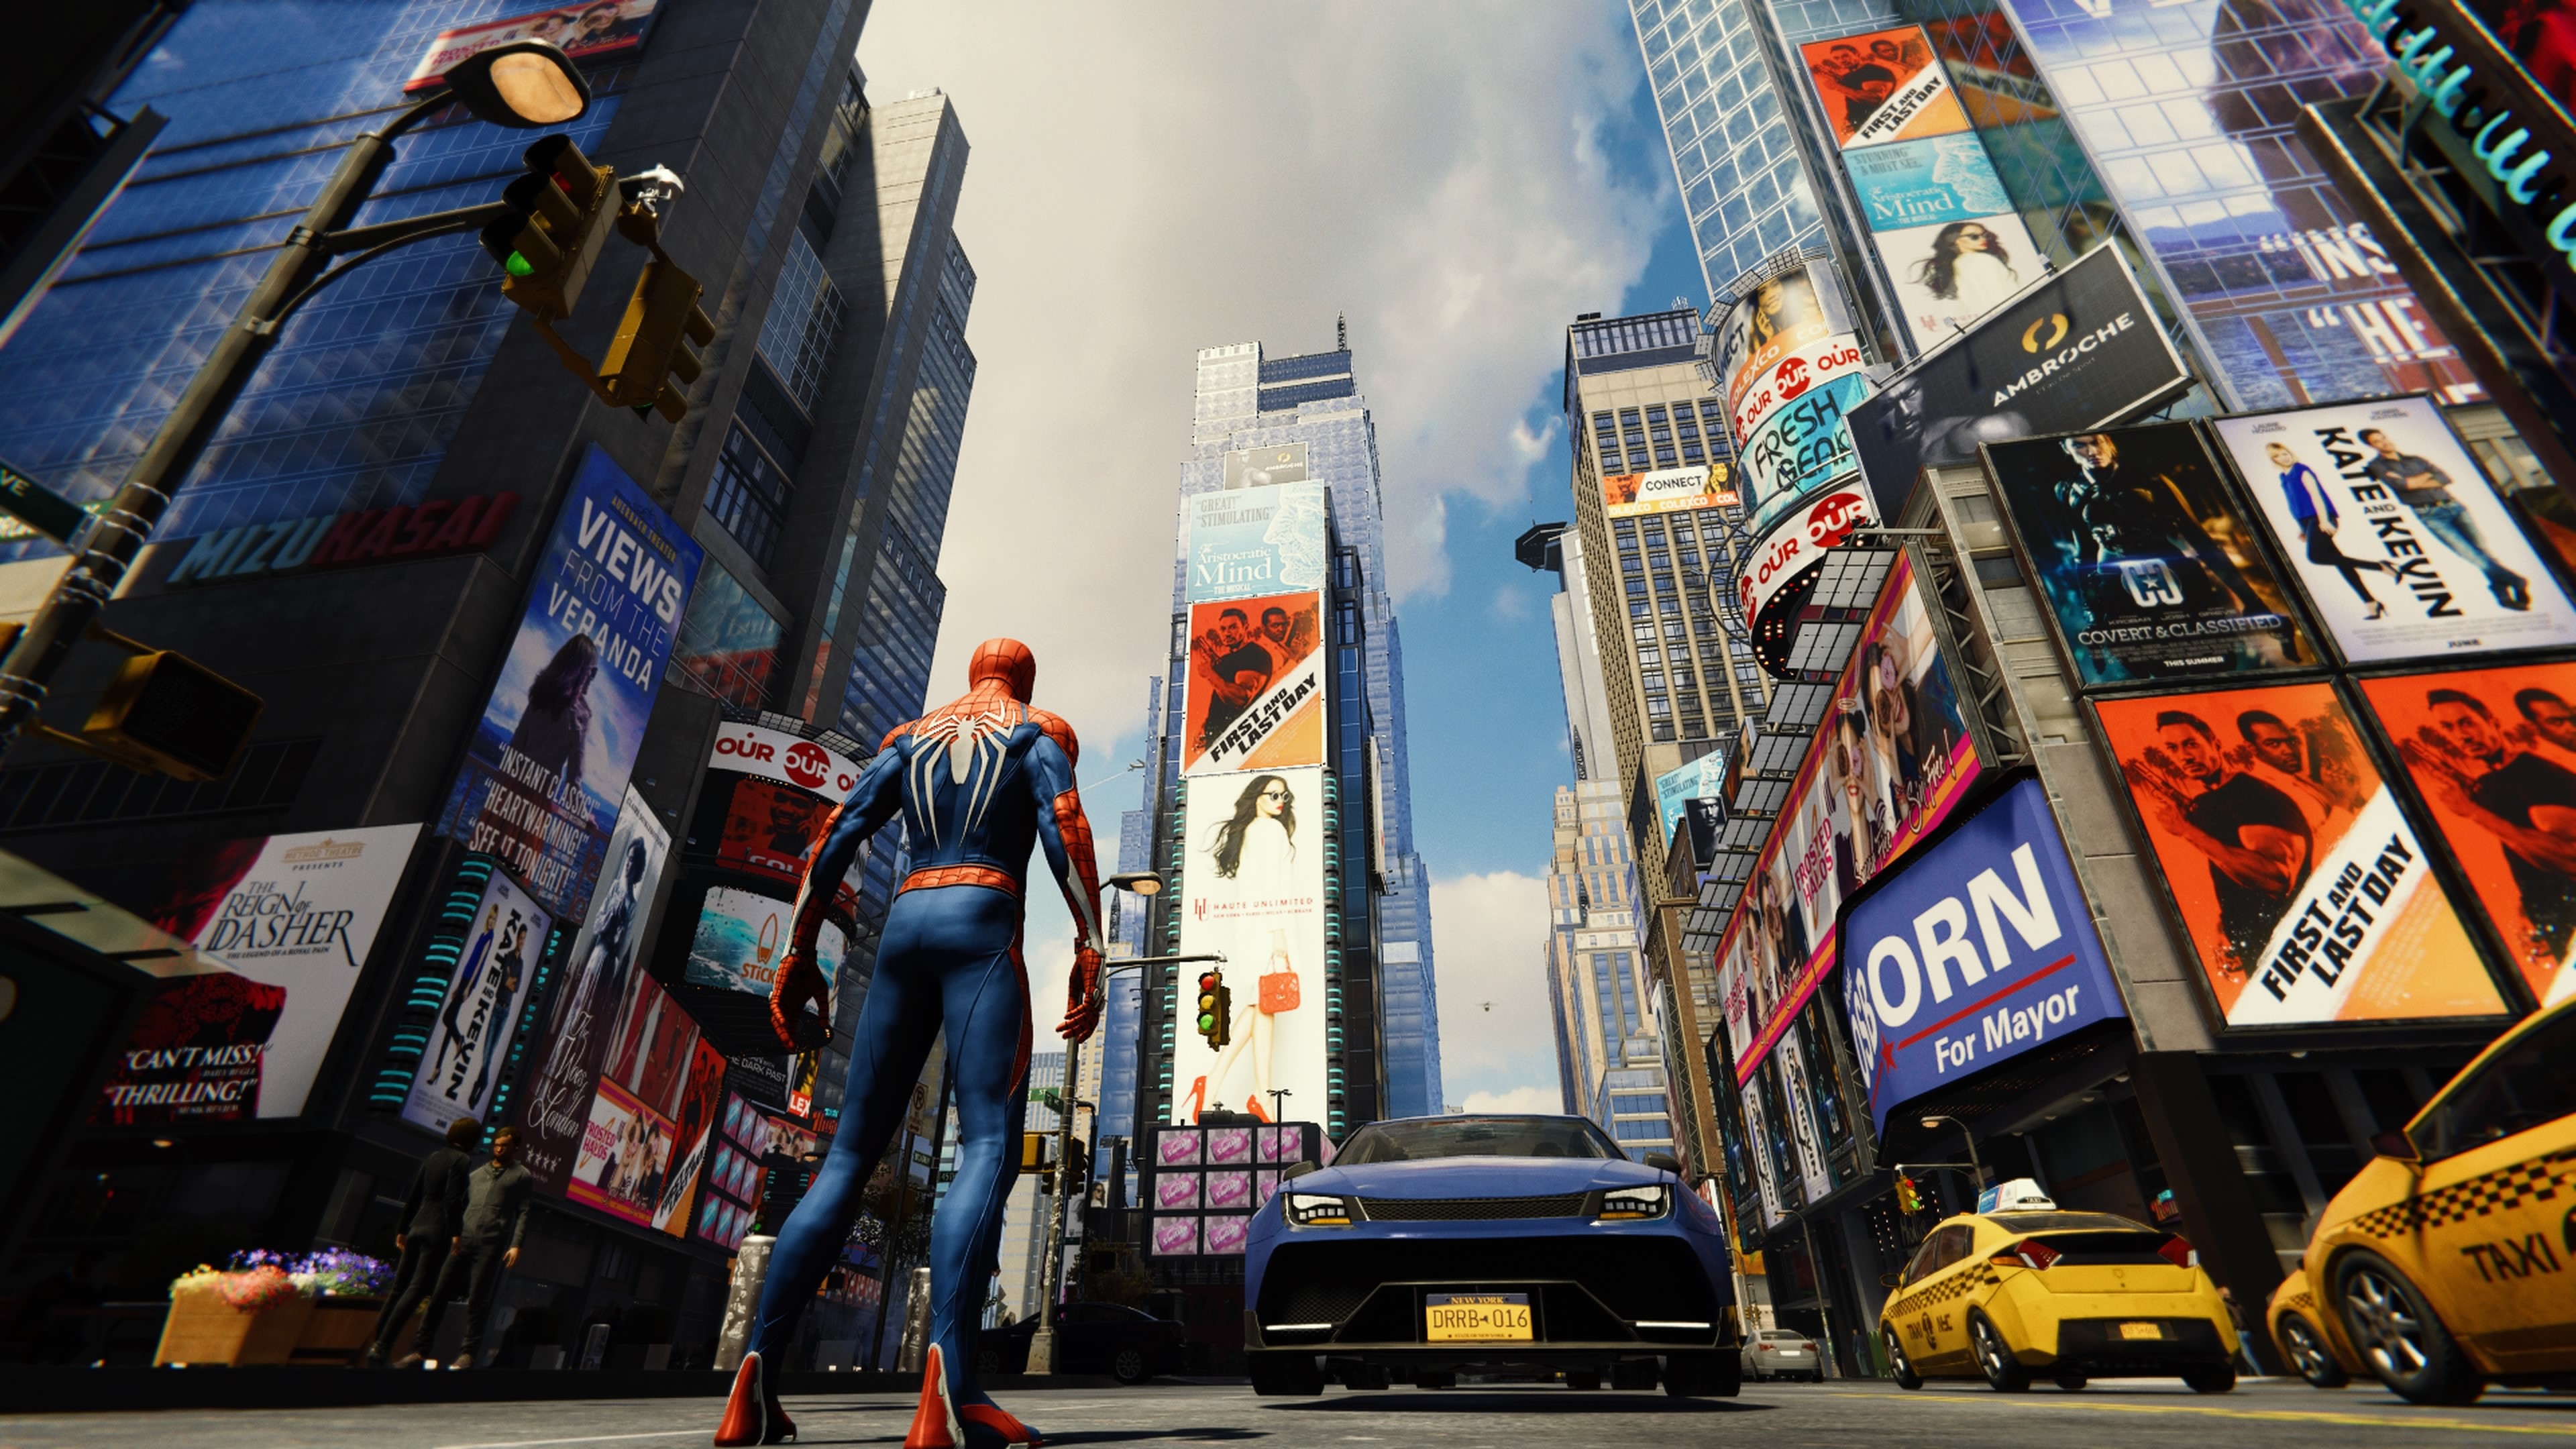 Marvel's Spider screenshot on time squaire